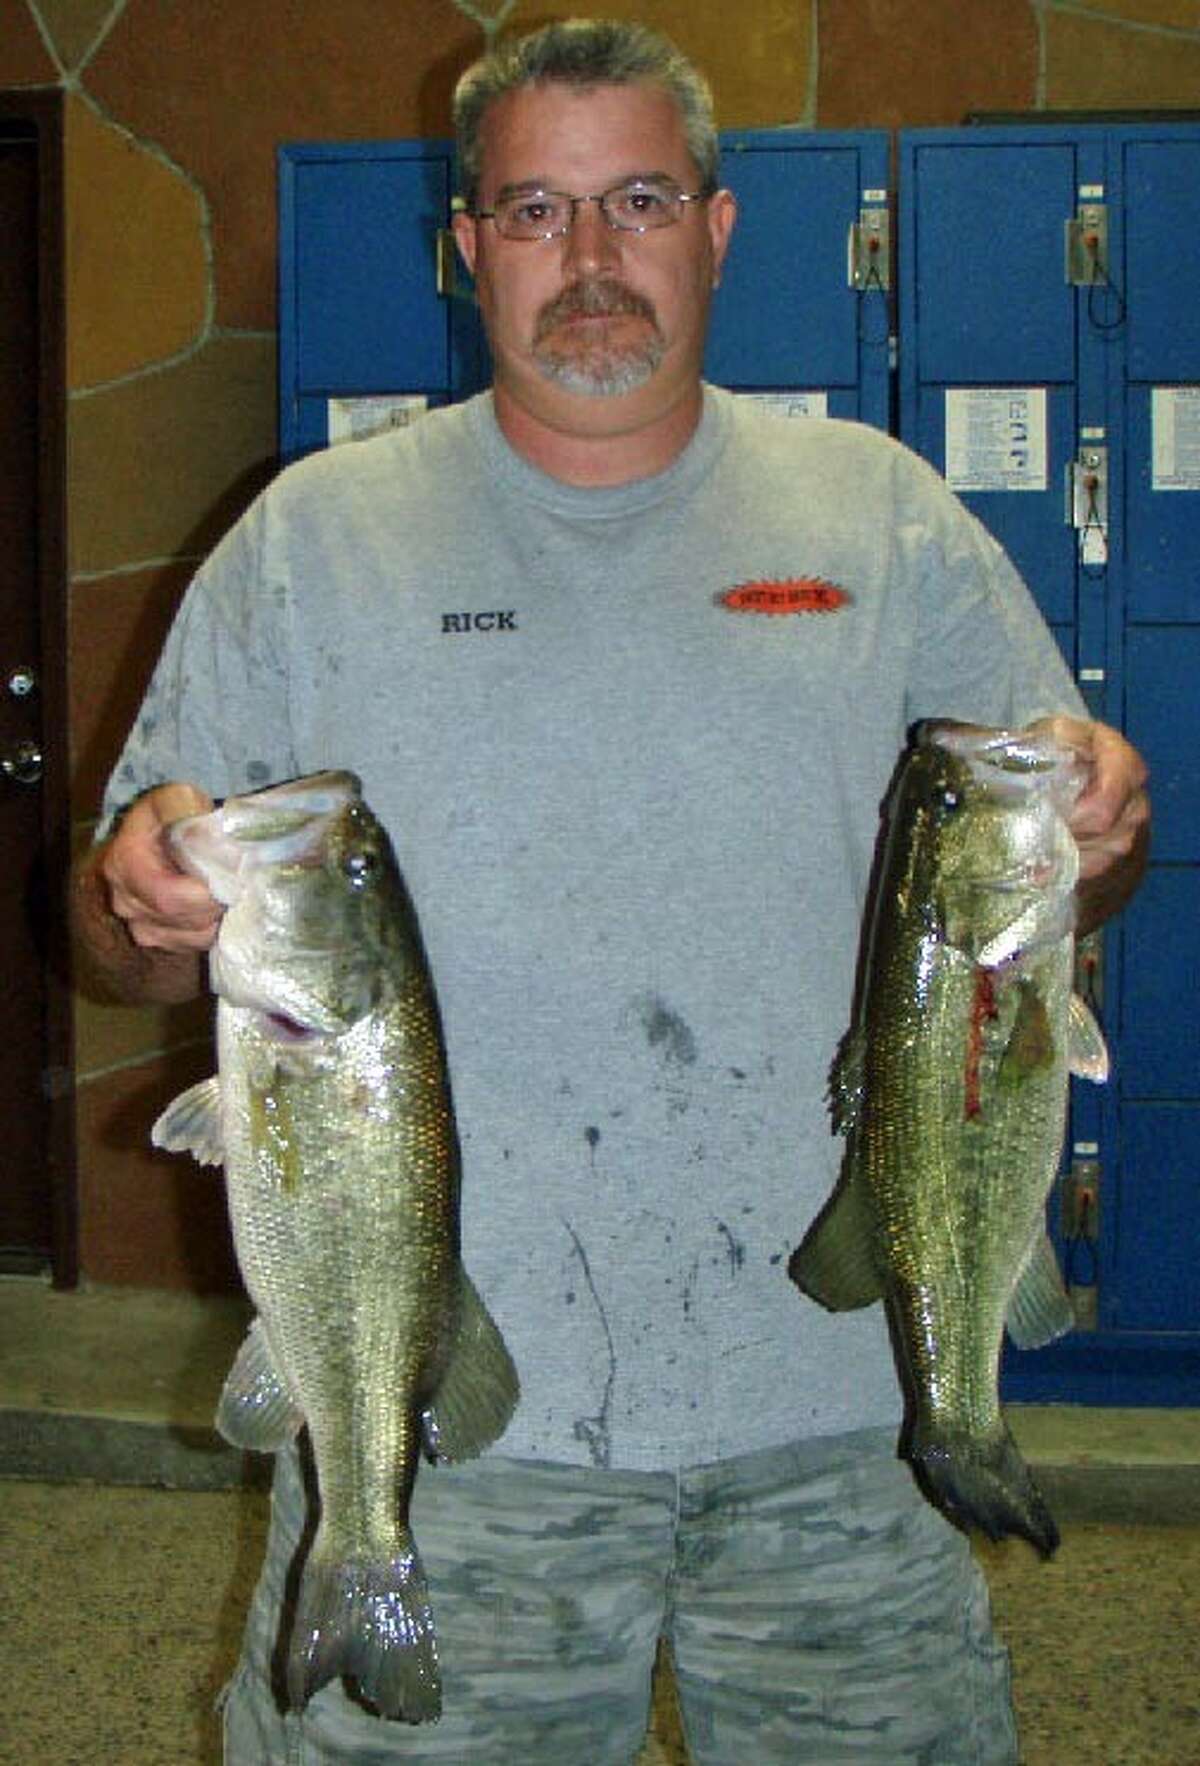 Charles Bebber and Rick Johnson finished third in the Conroe Bass Tuesday Night Tournament with a stringer weight of 10.76 pounds.